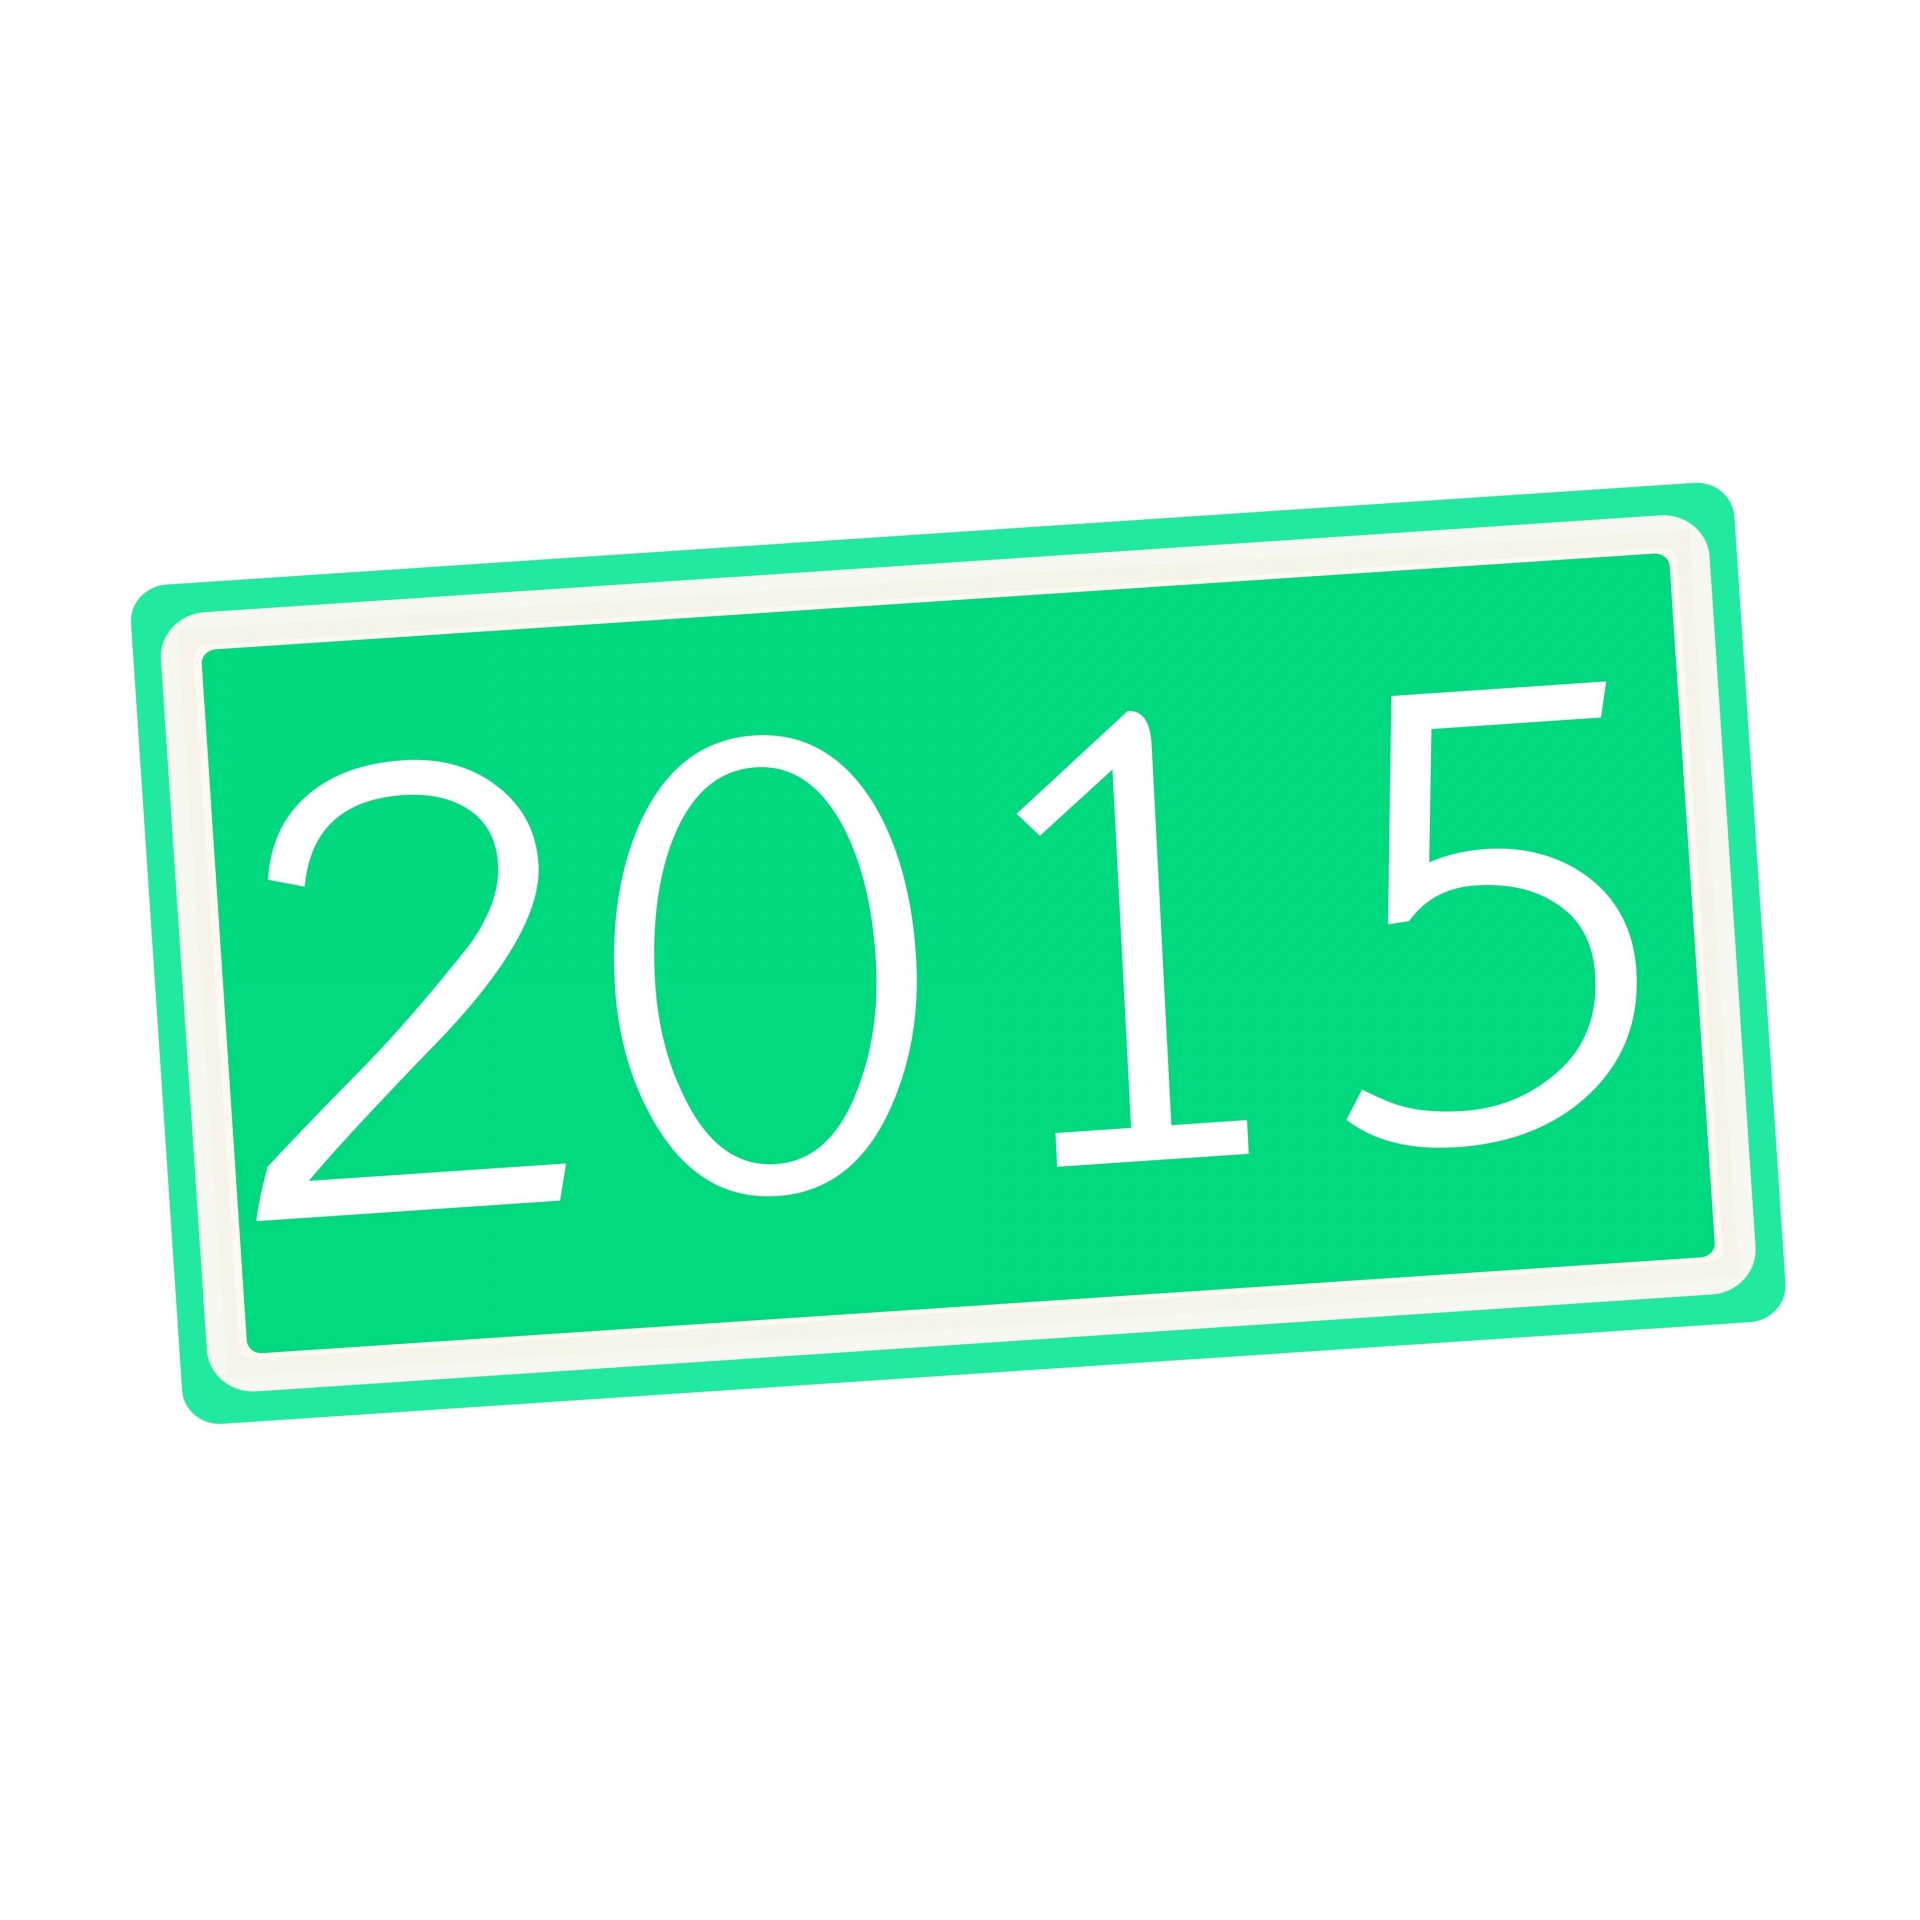 2015 White Stamp Text On Green